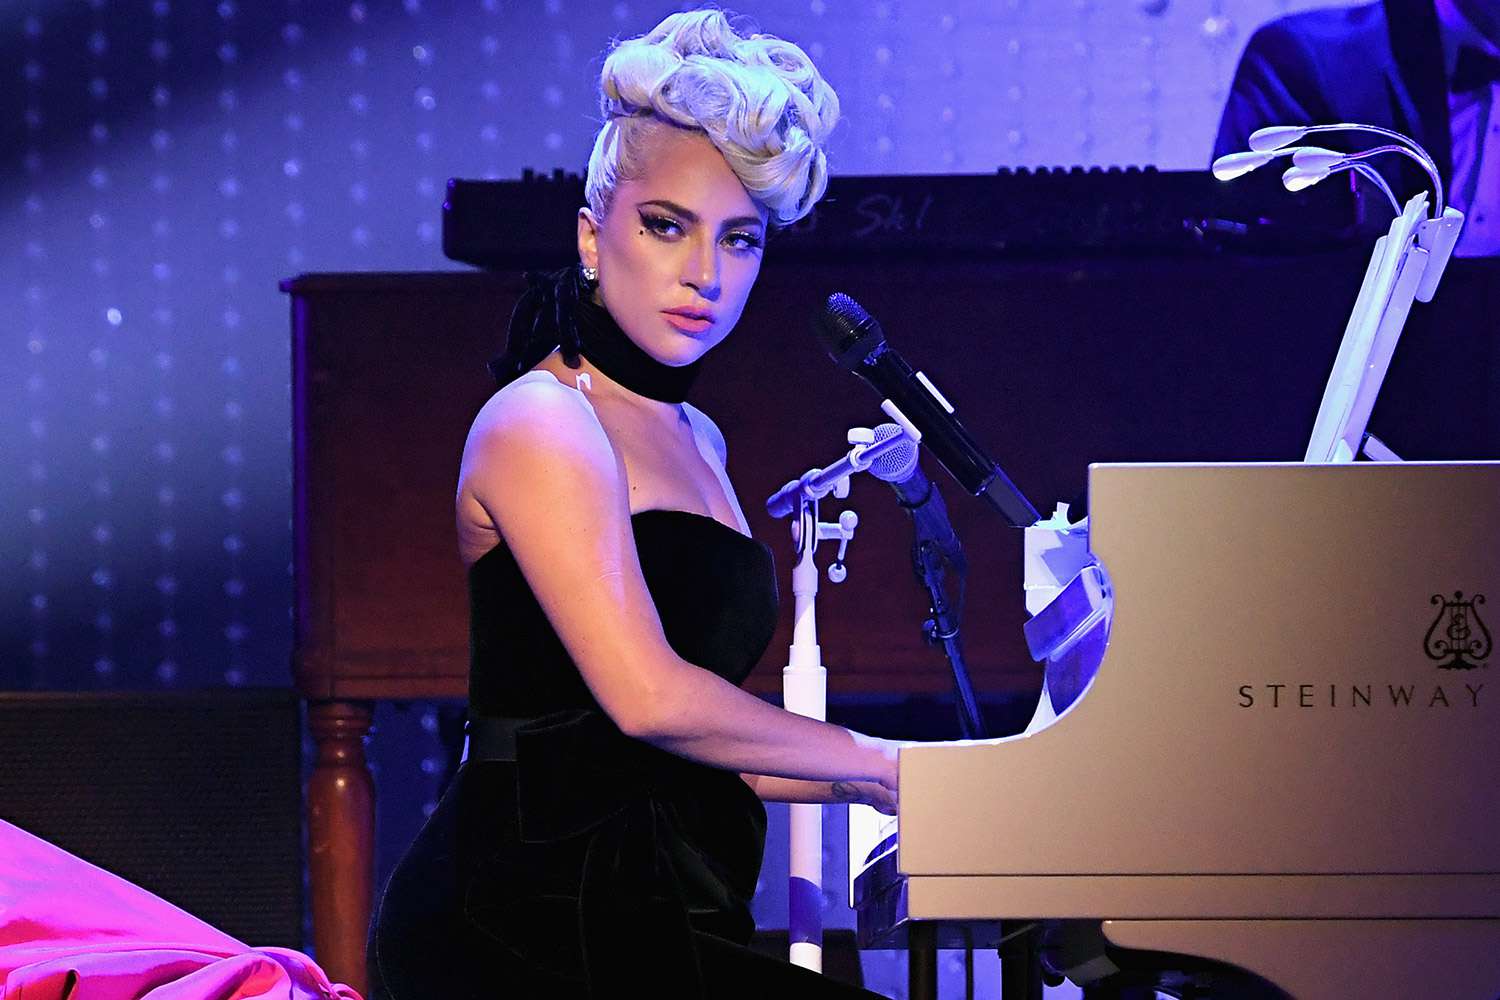 Lady Gaga wearing a black dress in front of a piano